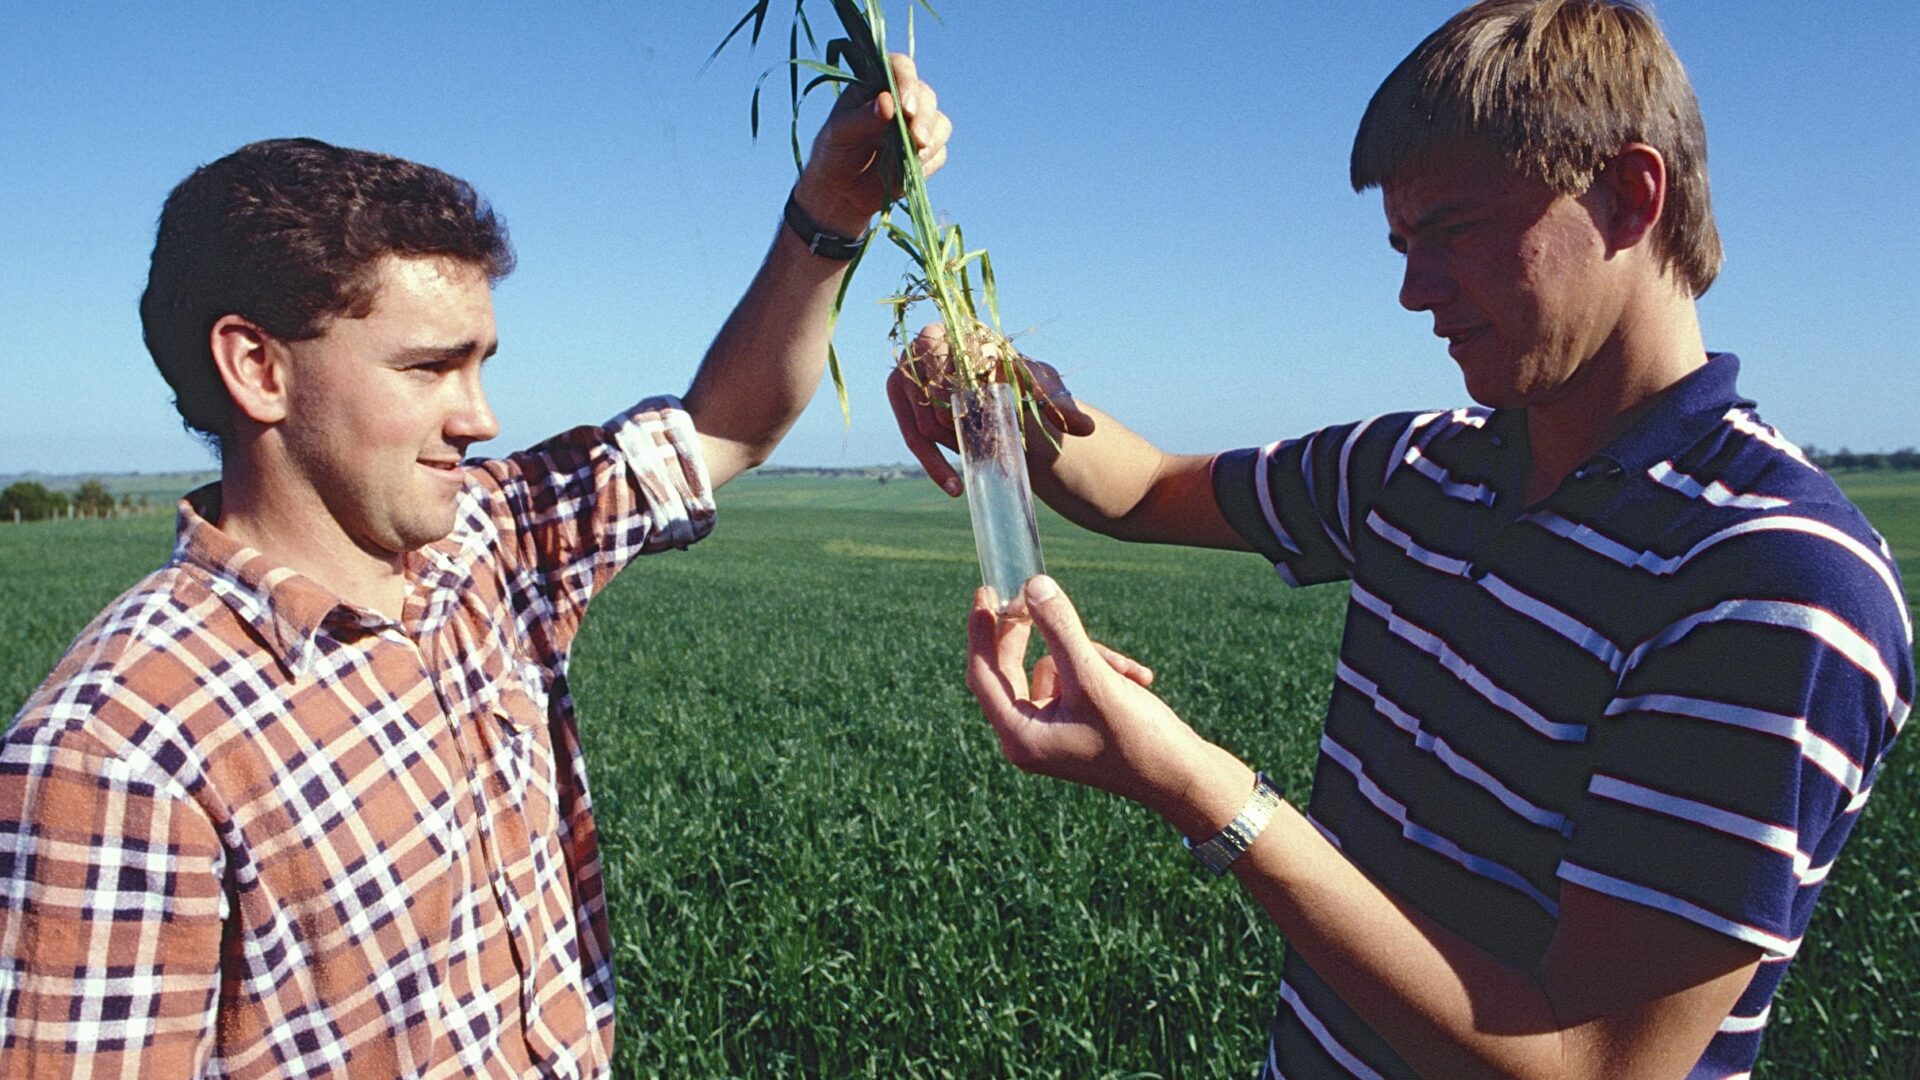 Two students holding a small crop plant up, behind them is a green field of crops.